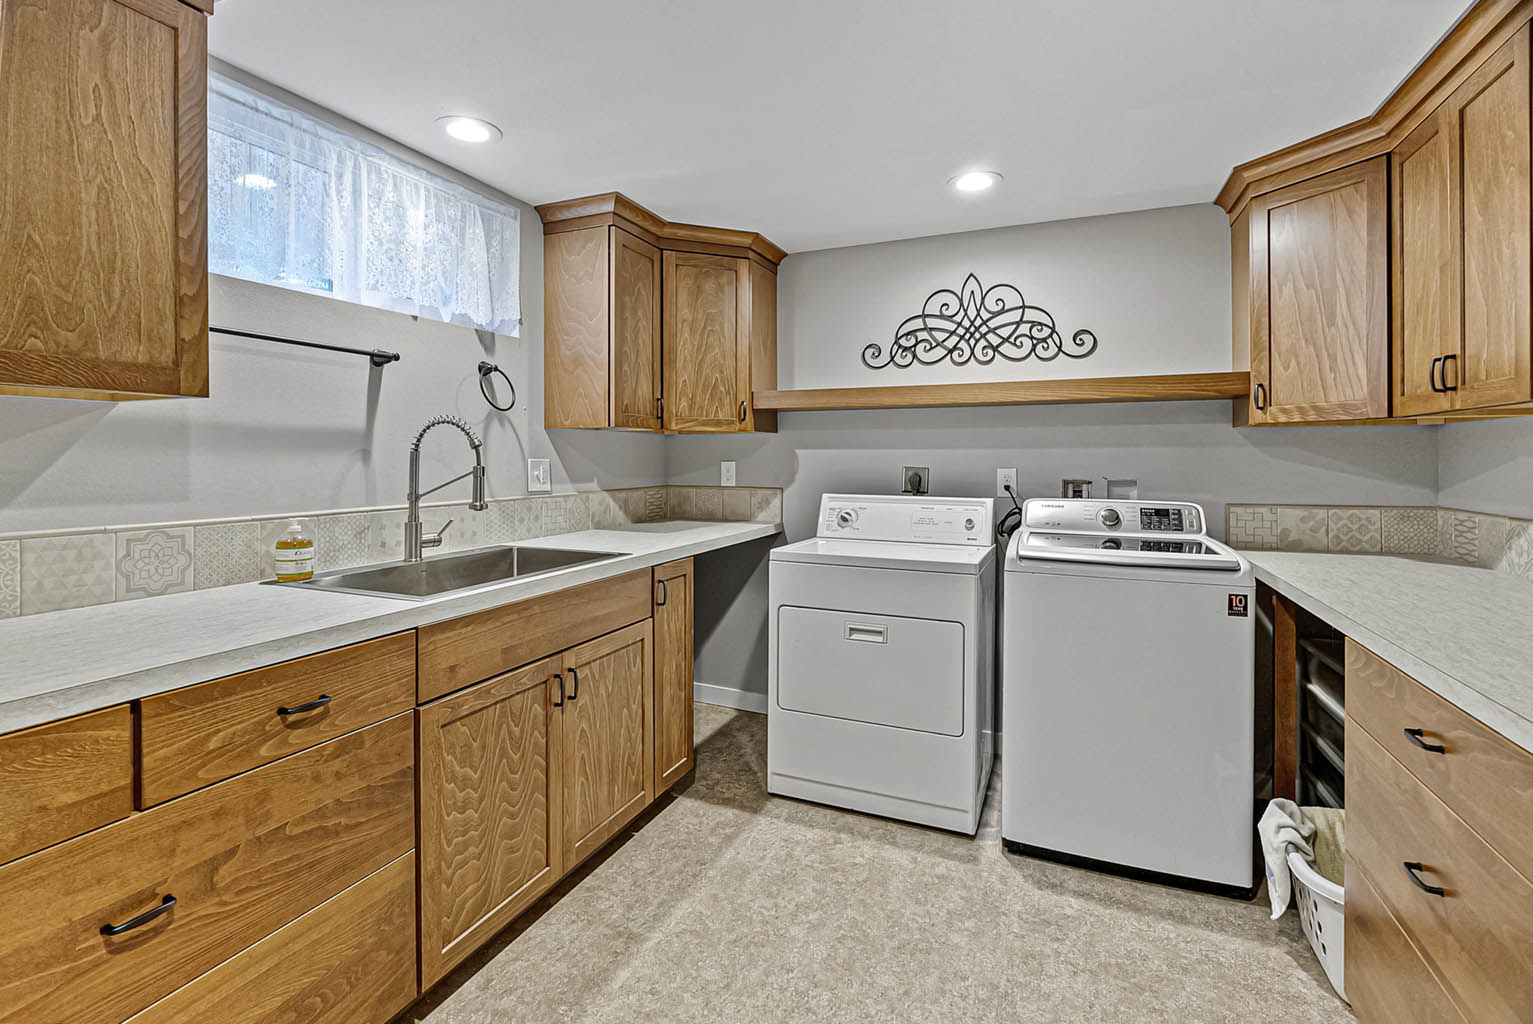 Spacious laundry room with ample storage